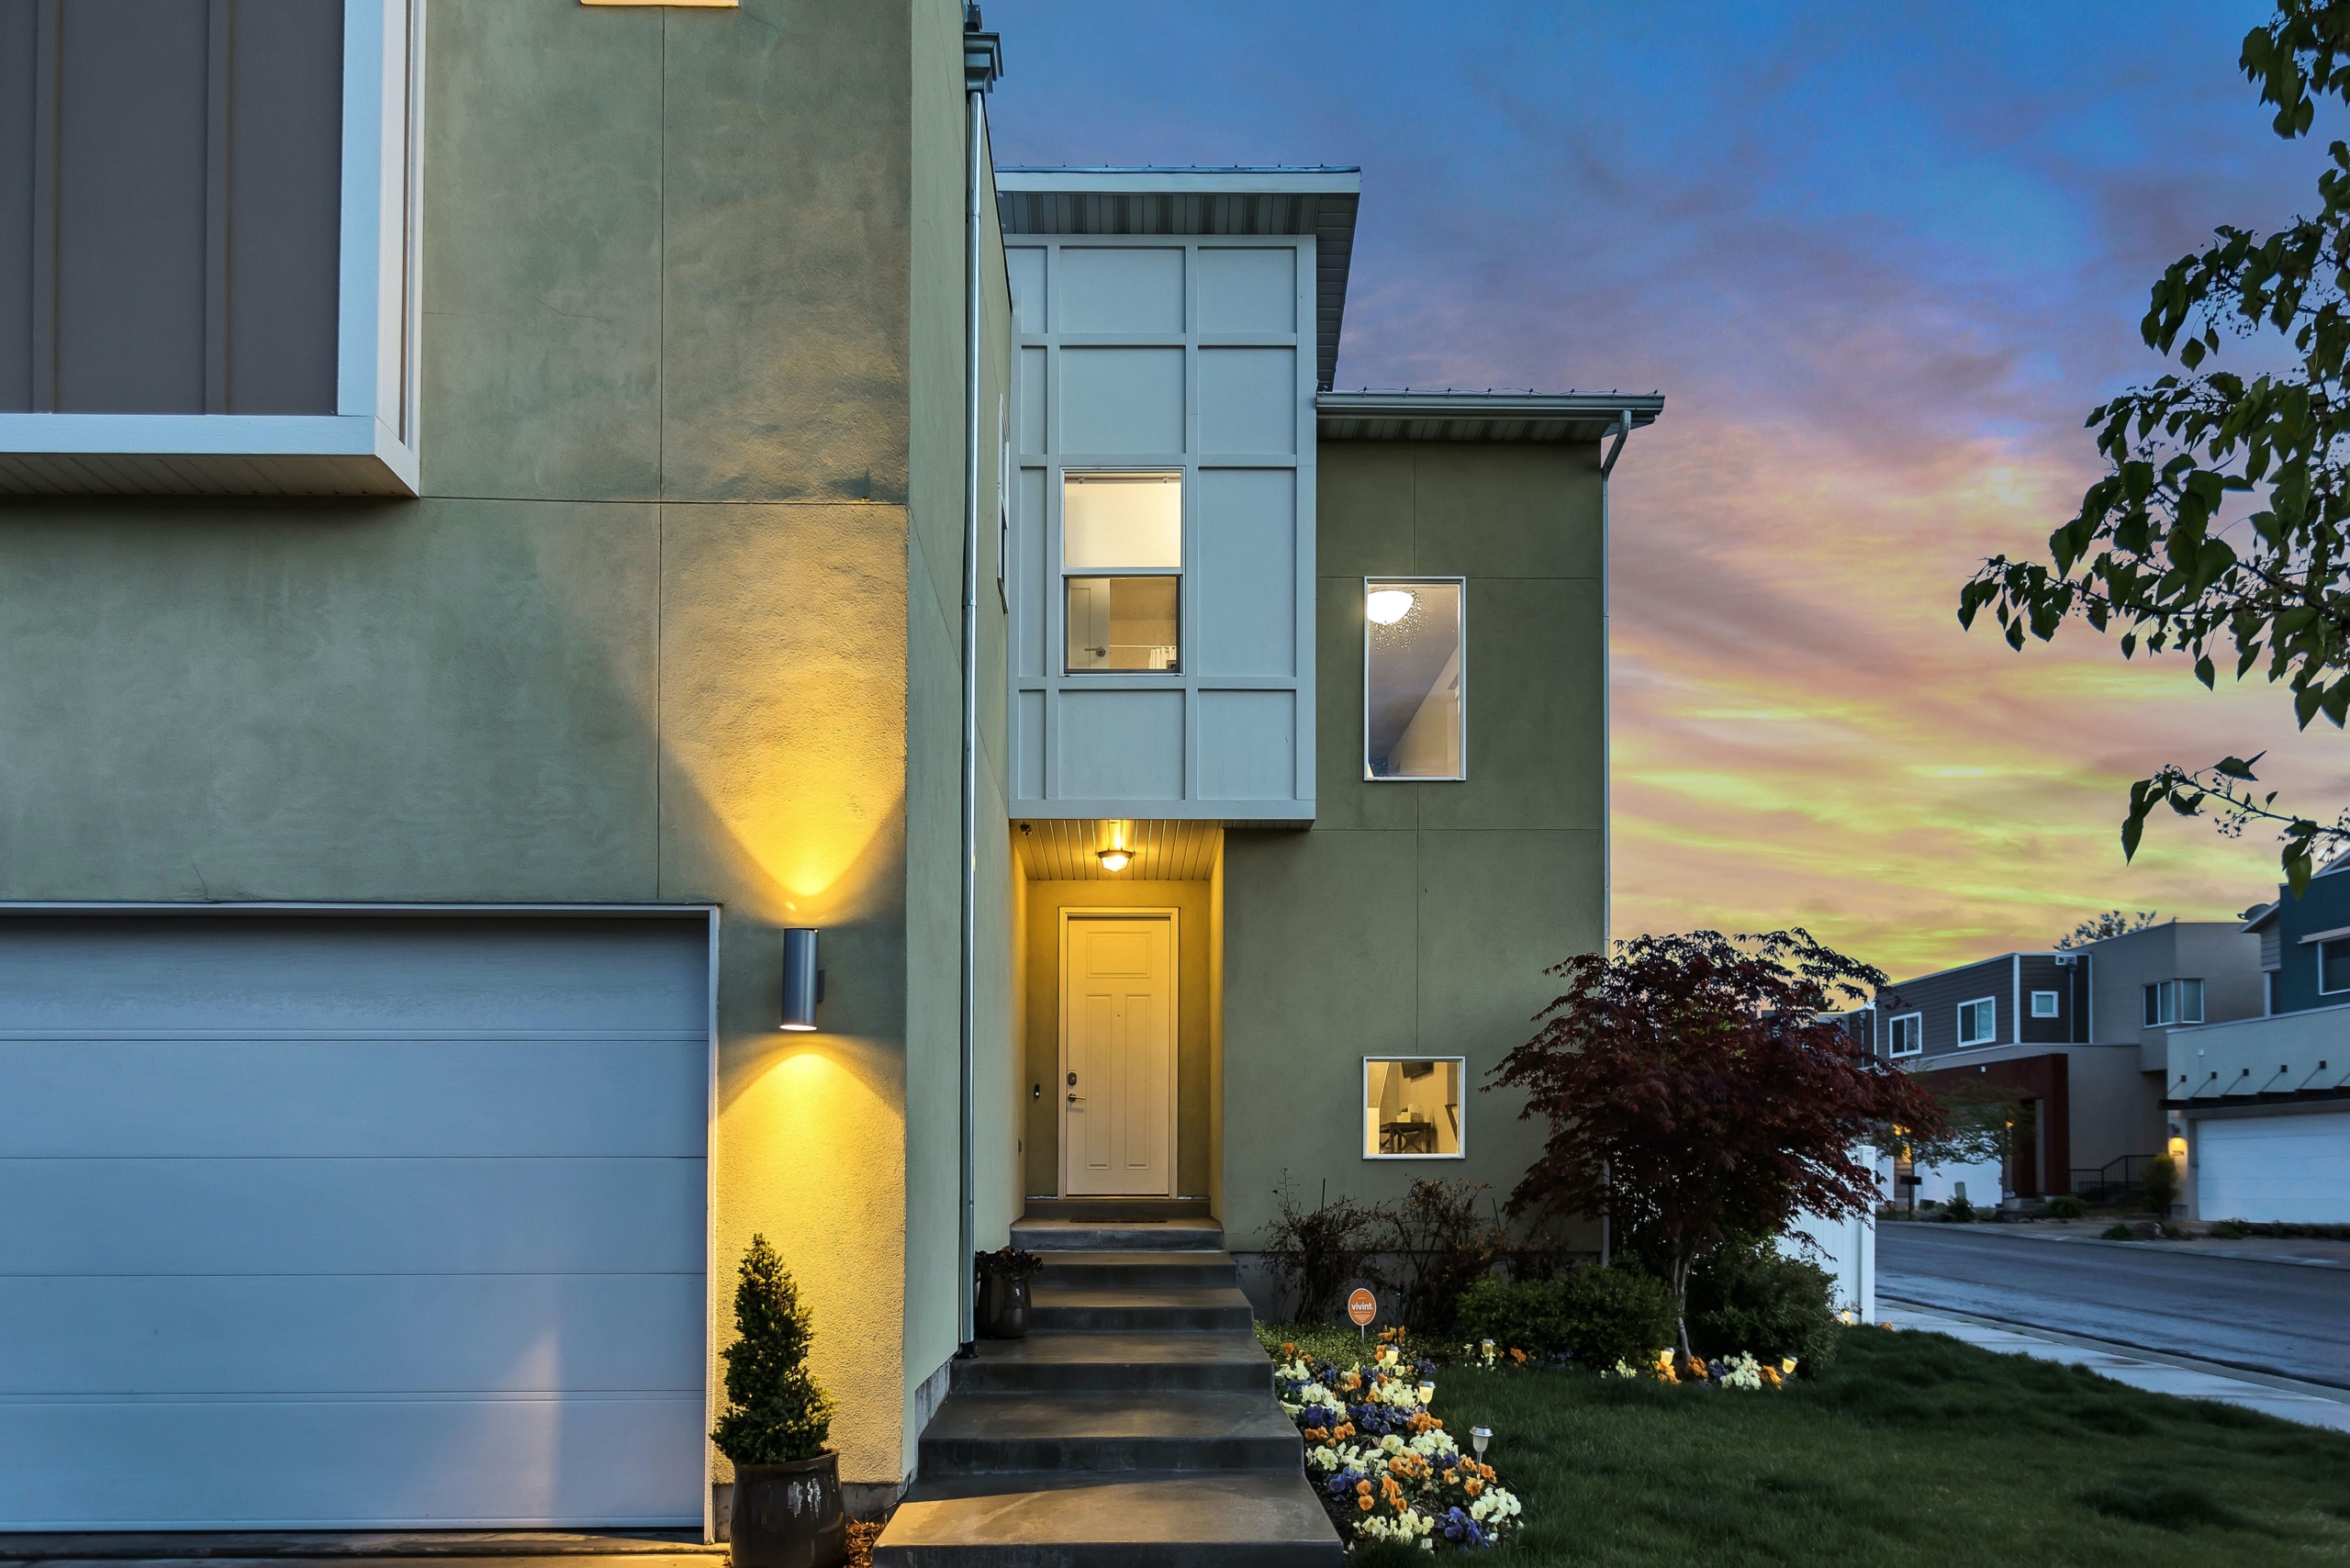 Image of modern townhouse with 1 car garage in front and cement pathway from garage/driveway to front door. At sunset with lights on. Two story with rectangle angles. Buying Your First Home across the image.